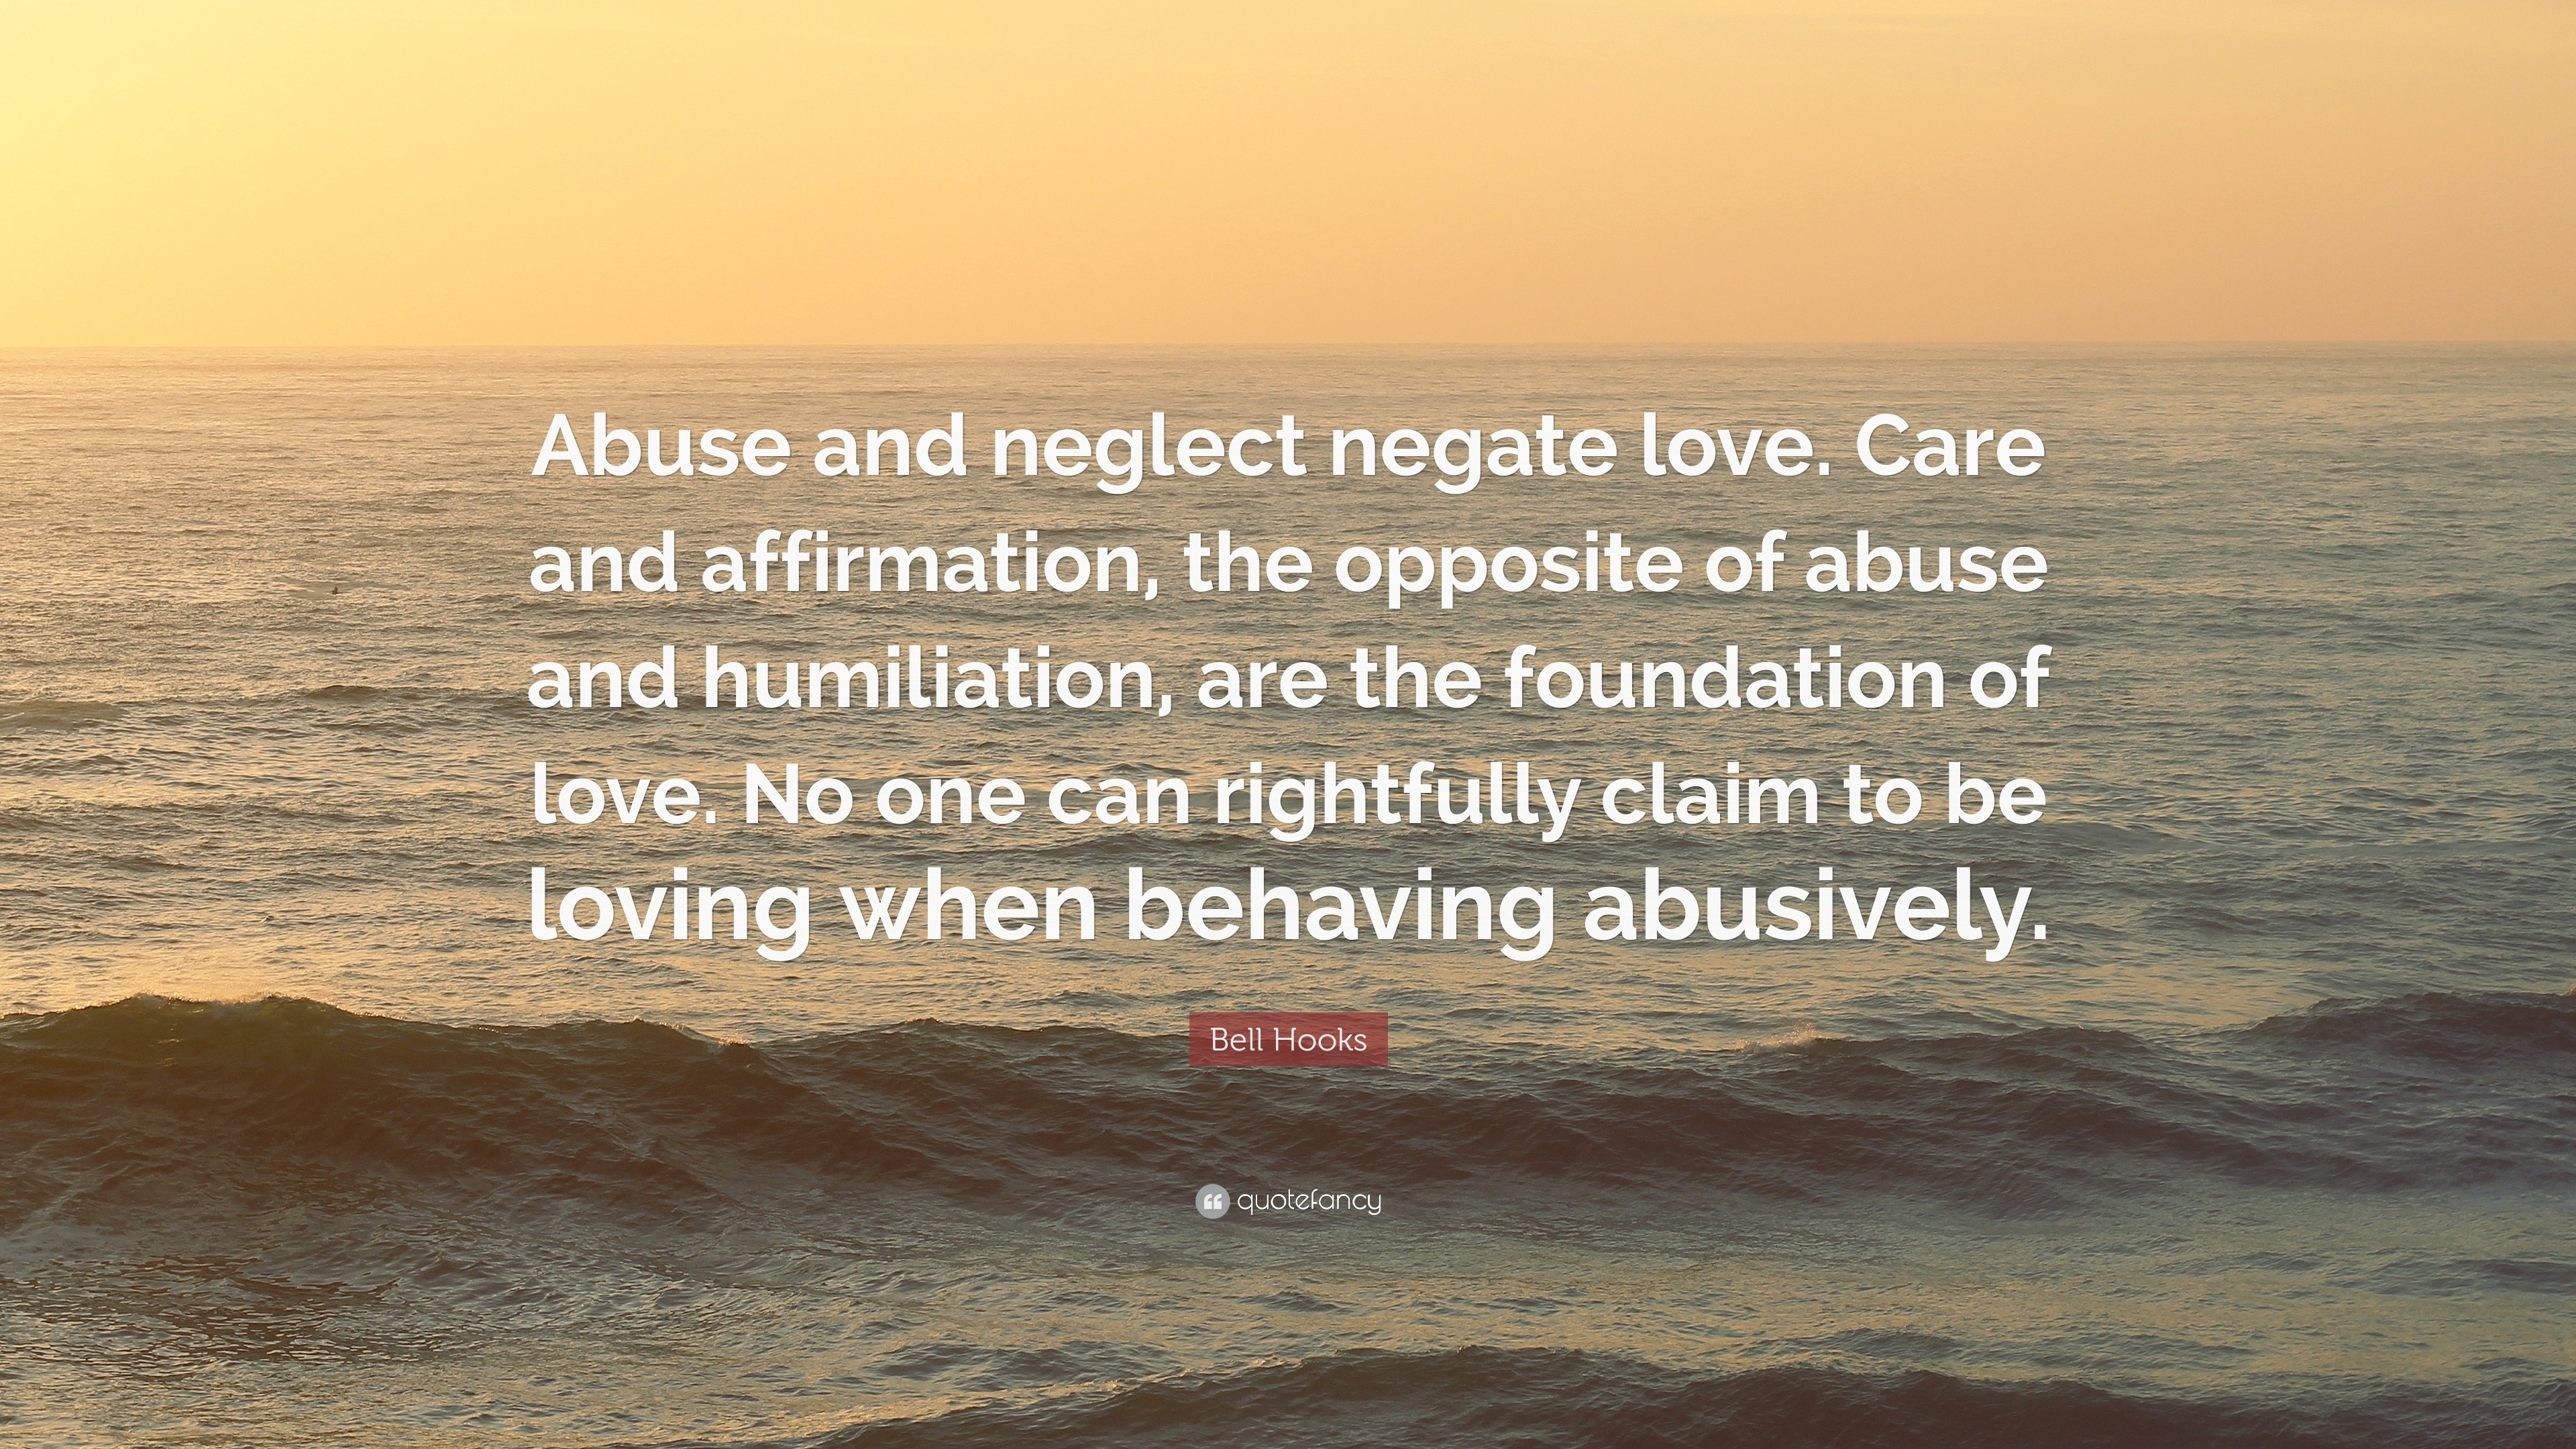 Bell Hooks Quote “Abuse and neglect negate love Care and affirmation the